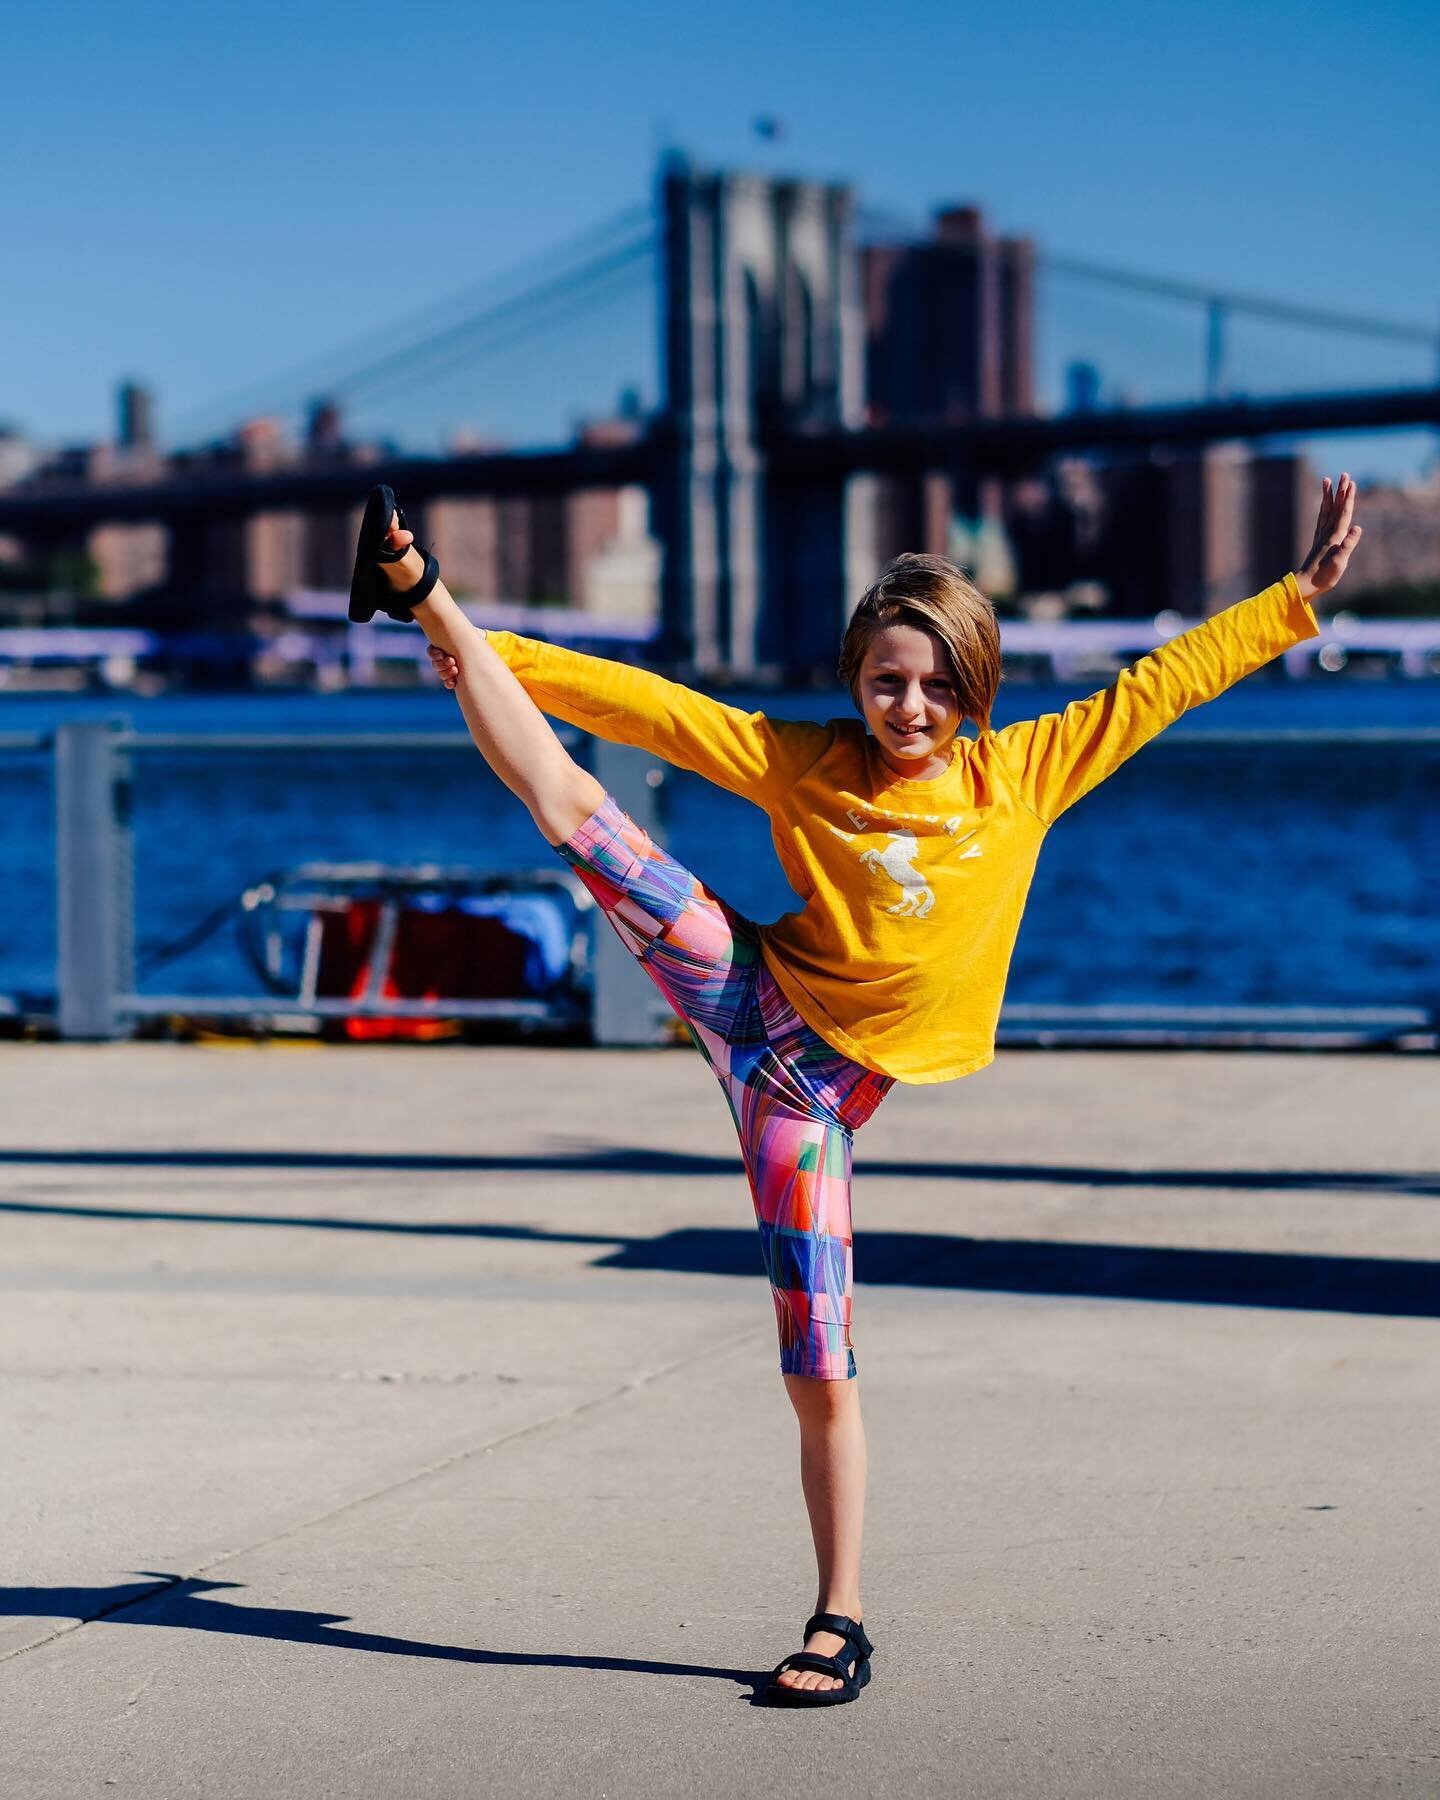 We love dancing in the city!
Photo credit: @zhaus 

#youthcompany #youngdancers #youngartists #dancenyc #dancetheatre #youthcompany #brooklynkids #brooklynfamilies #brooklynmoms #brooklyndads #brooklynparents #supportthearts #danceeducation #dancecom